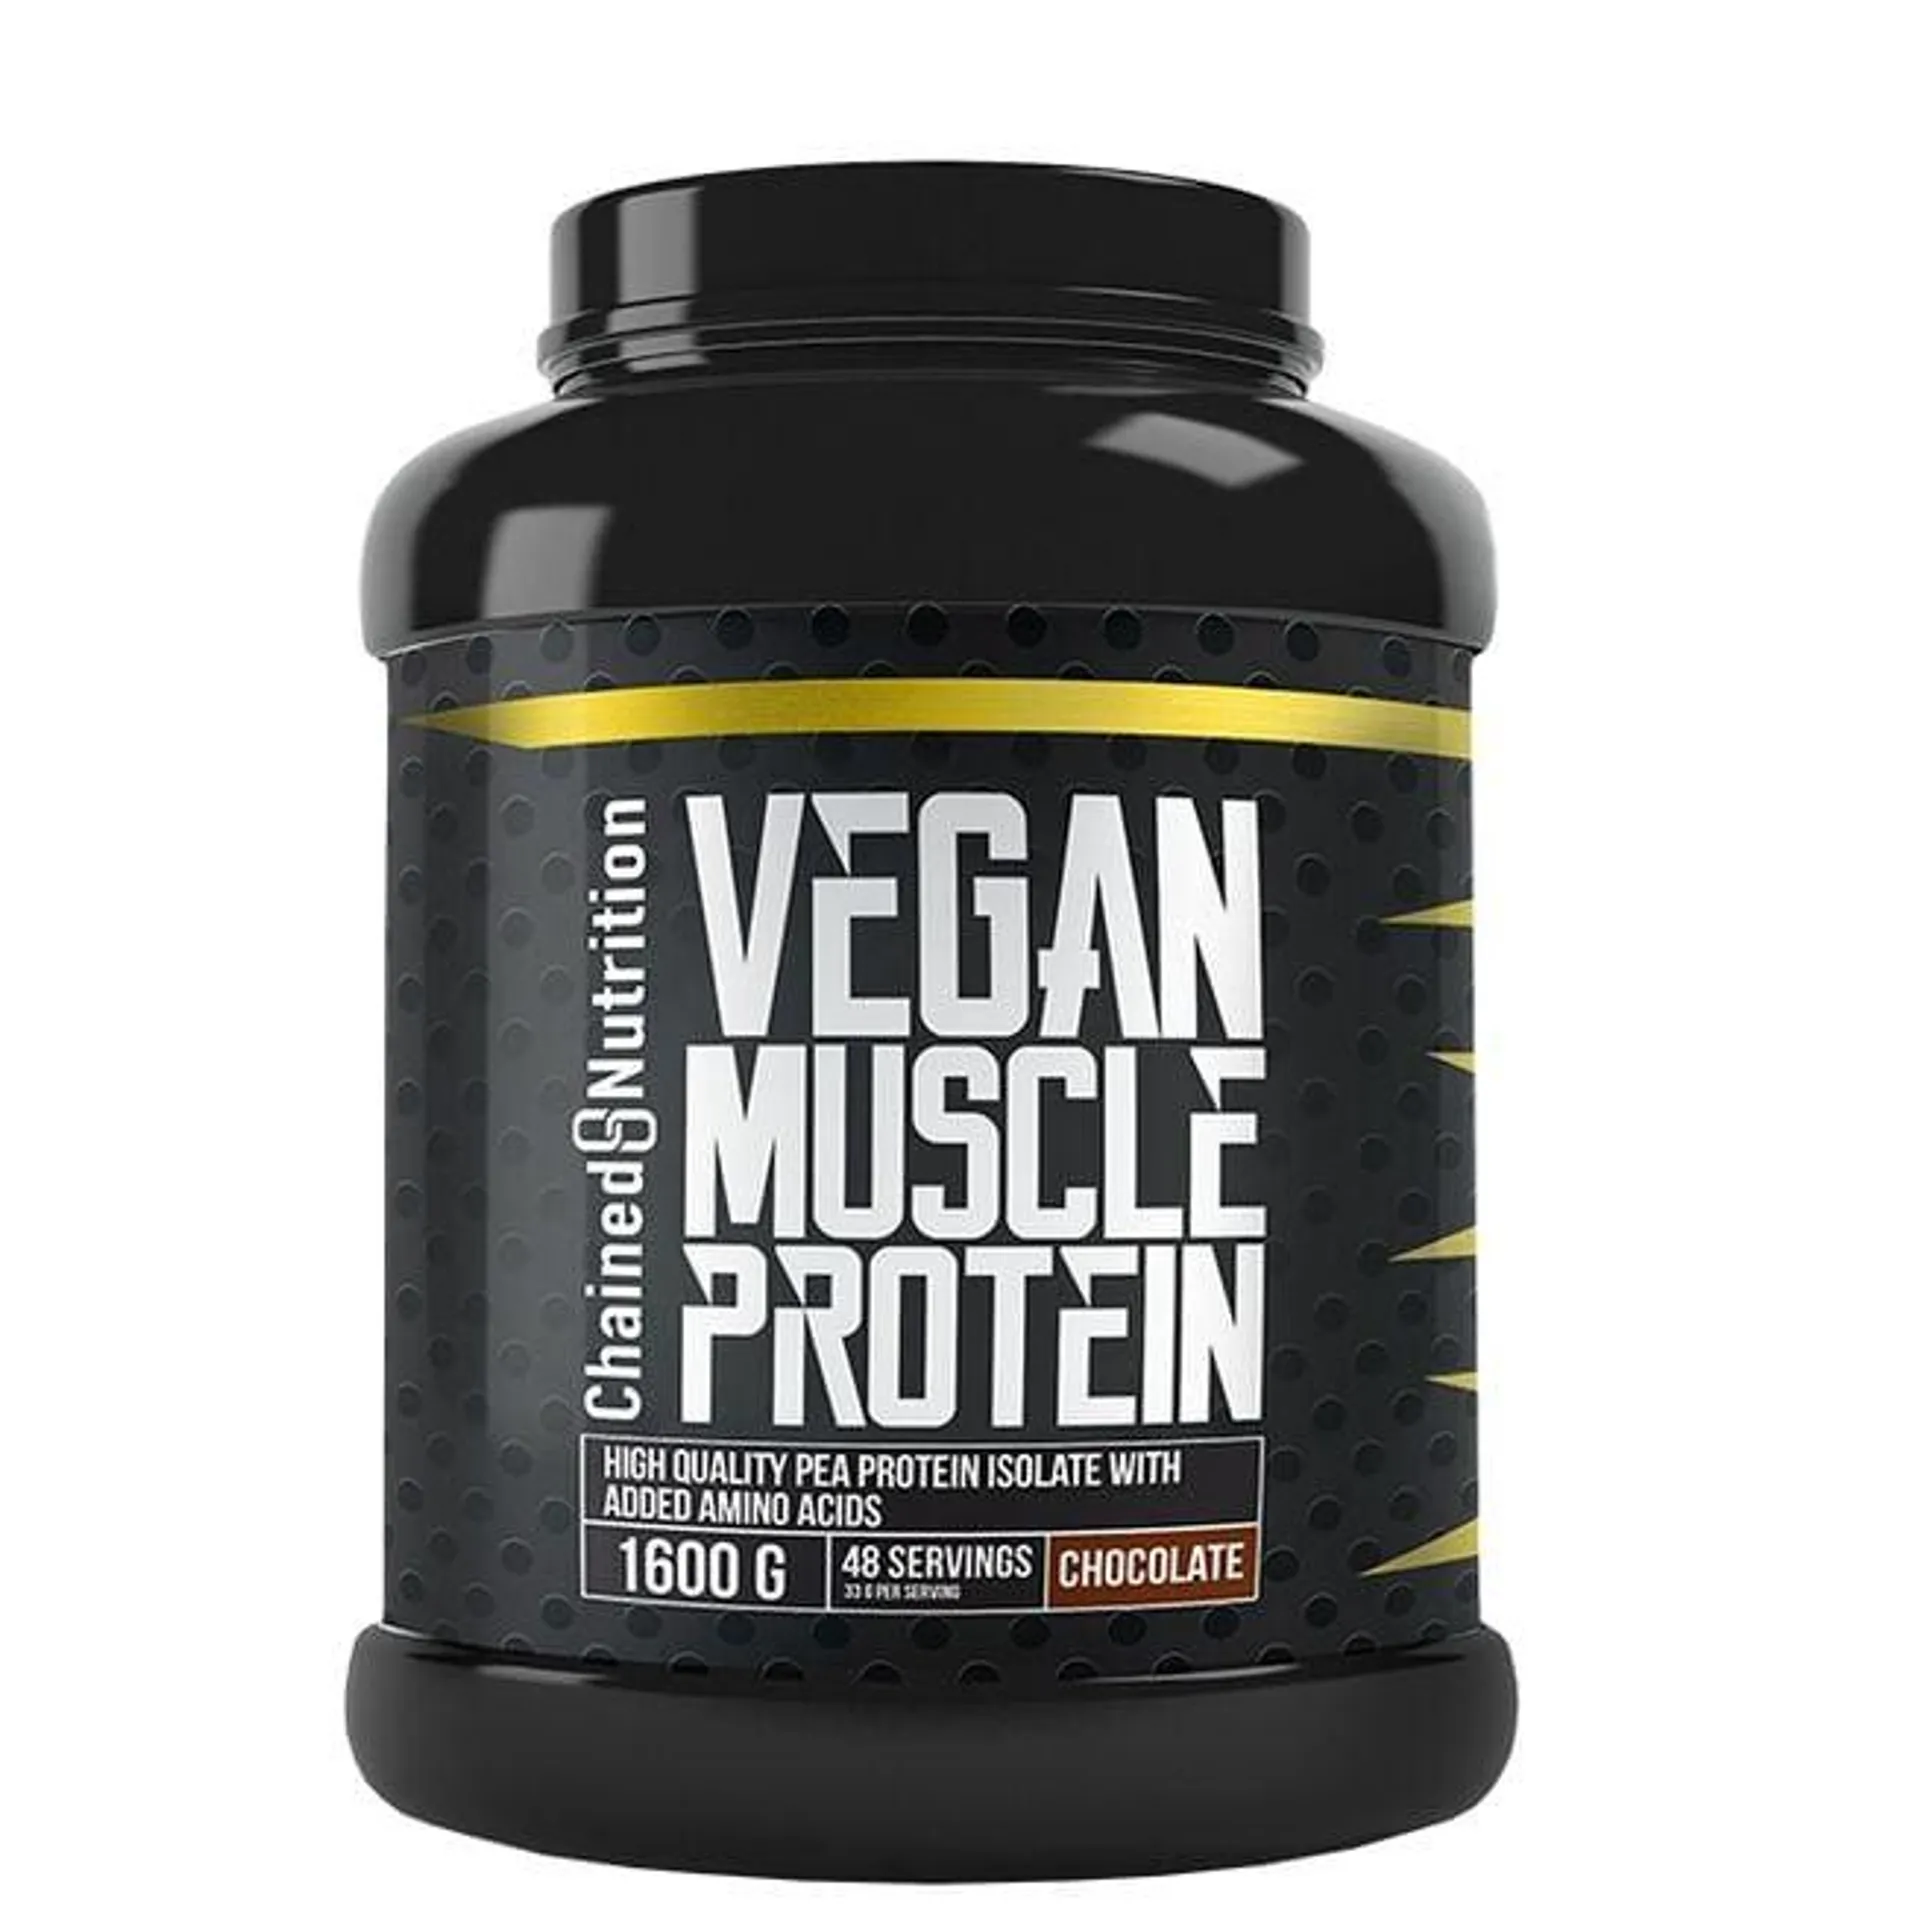 Vegan Muscle Protein, 1600 g Chocolate